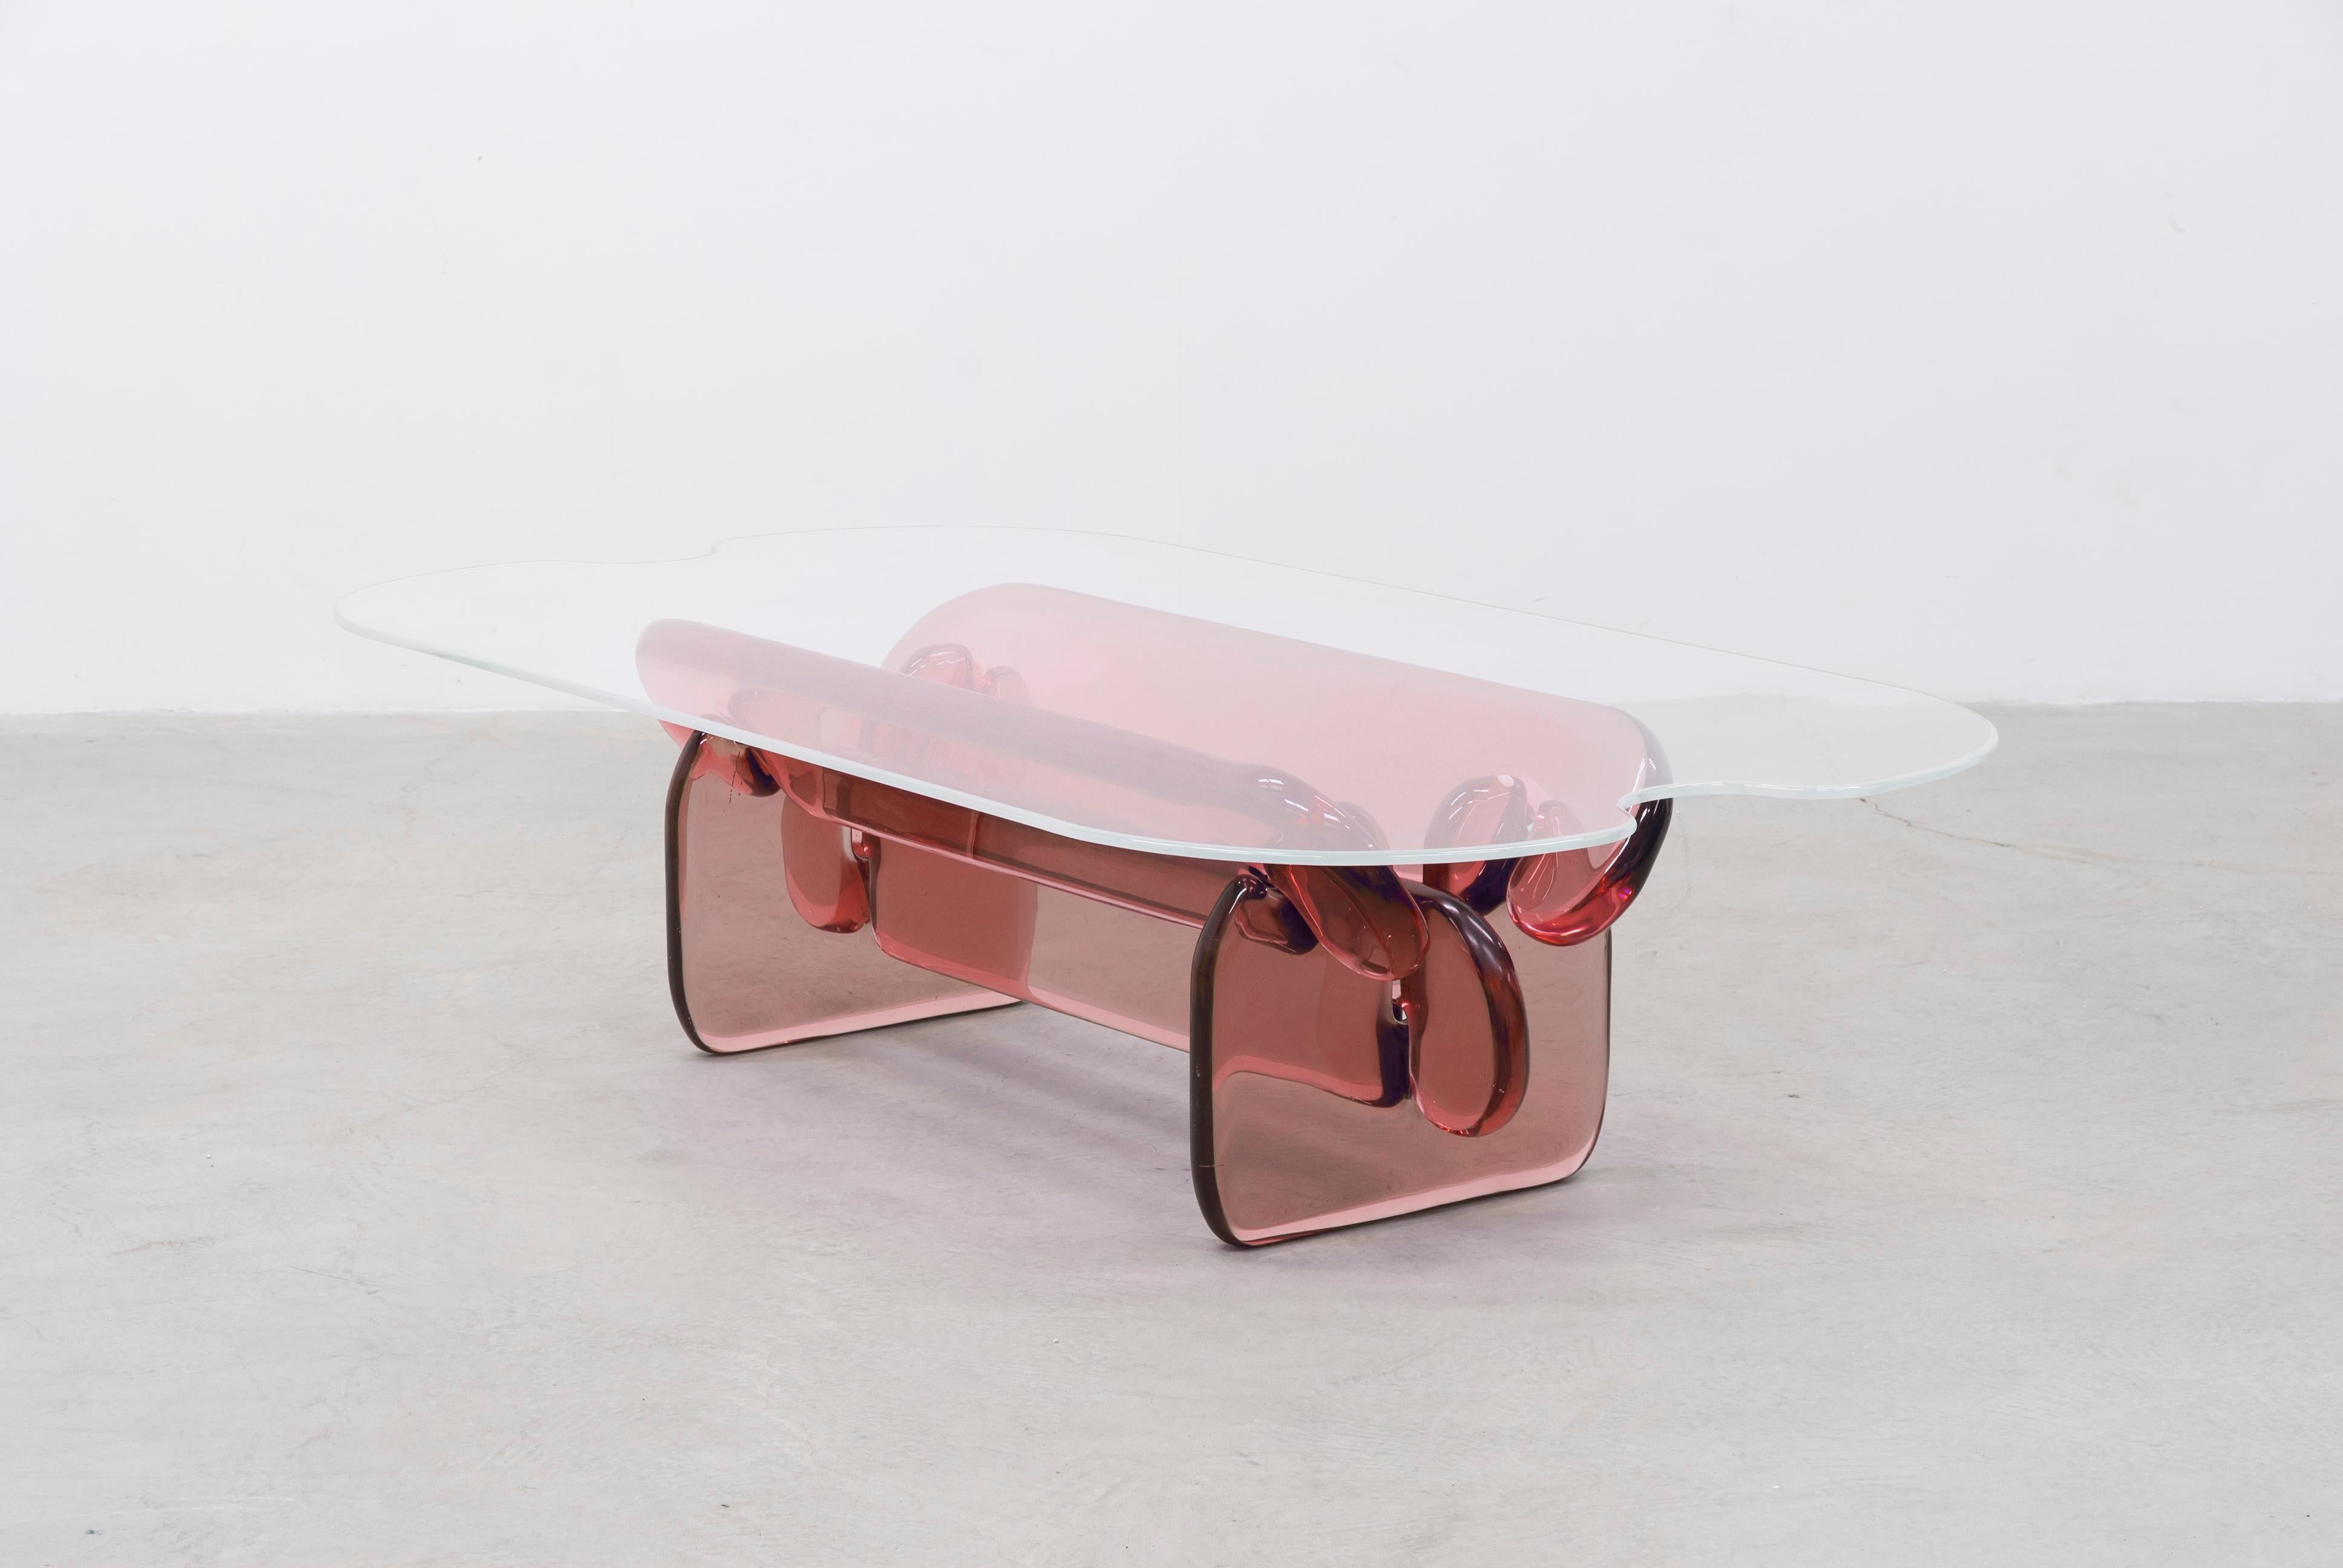 Contemporary Plump resin table in Hard Candy Purple by Ian Alistair Cochran